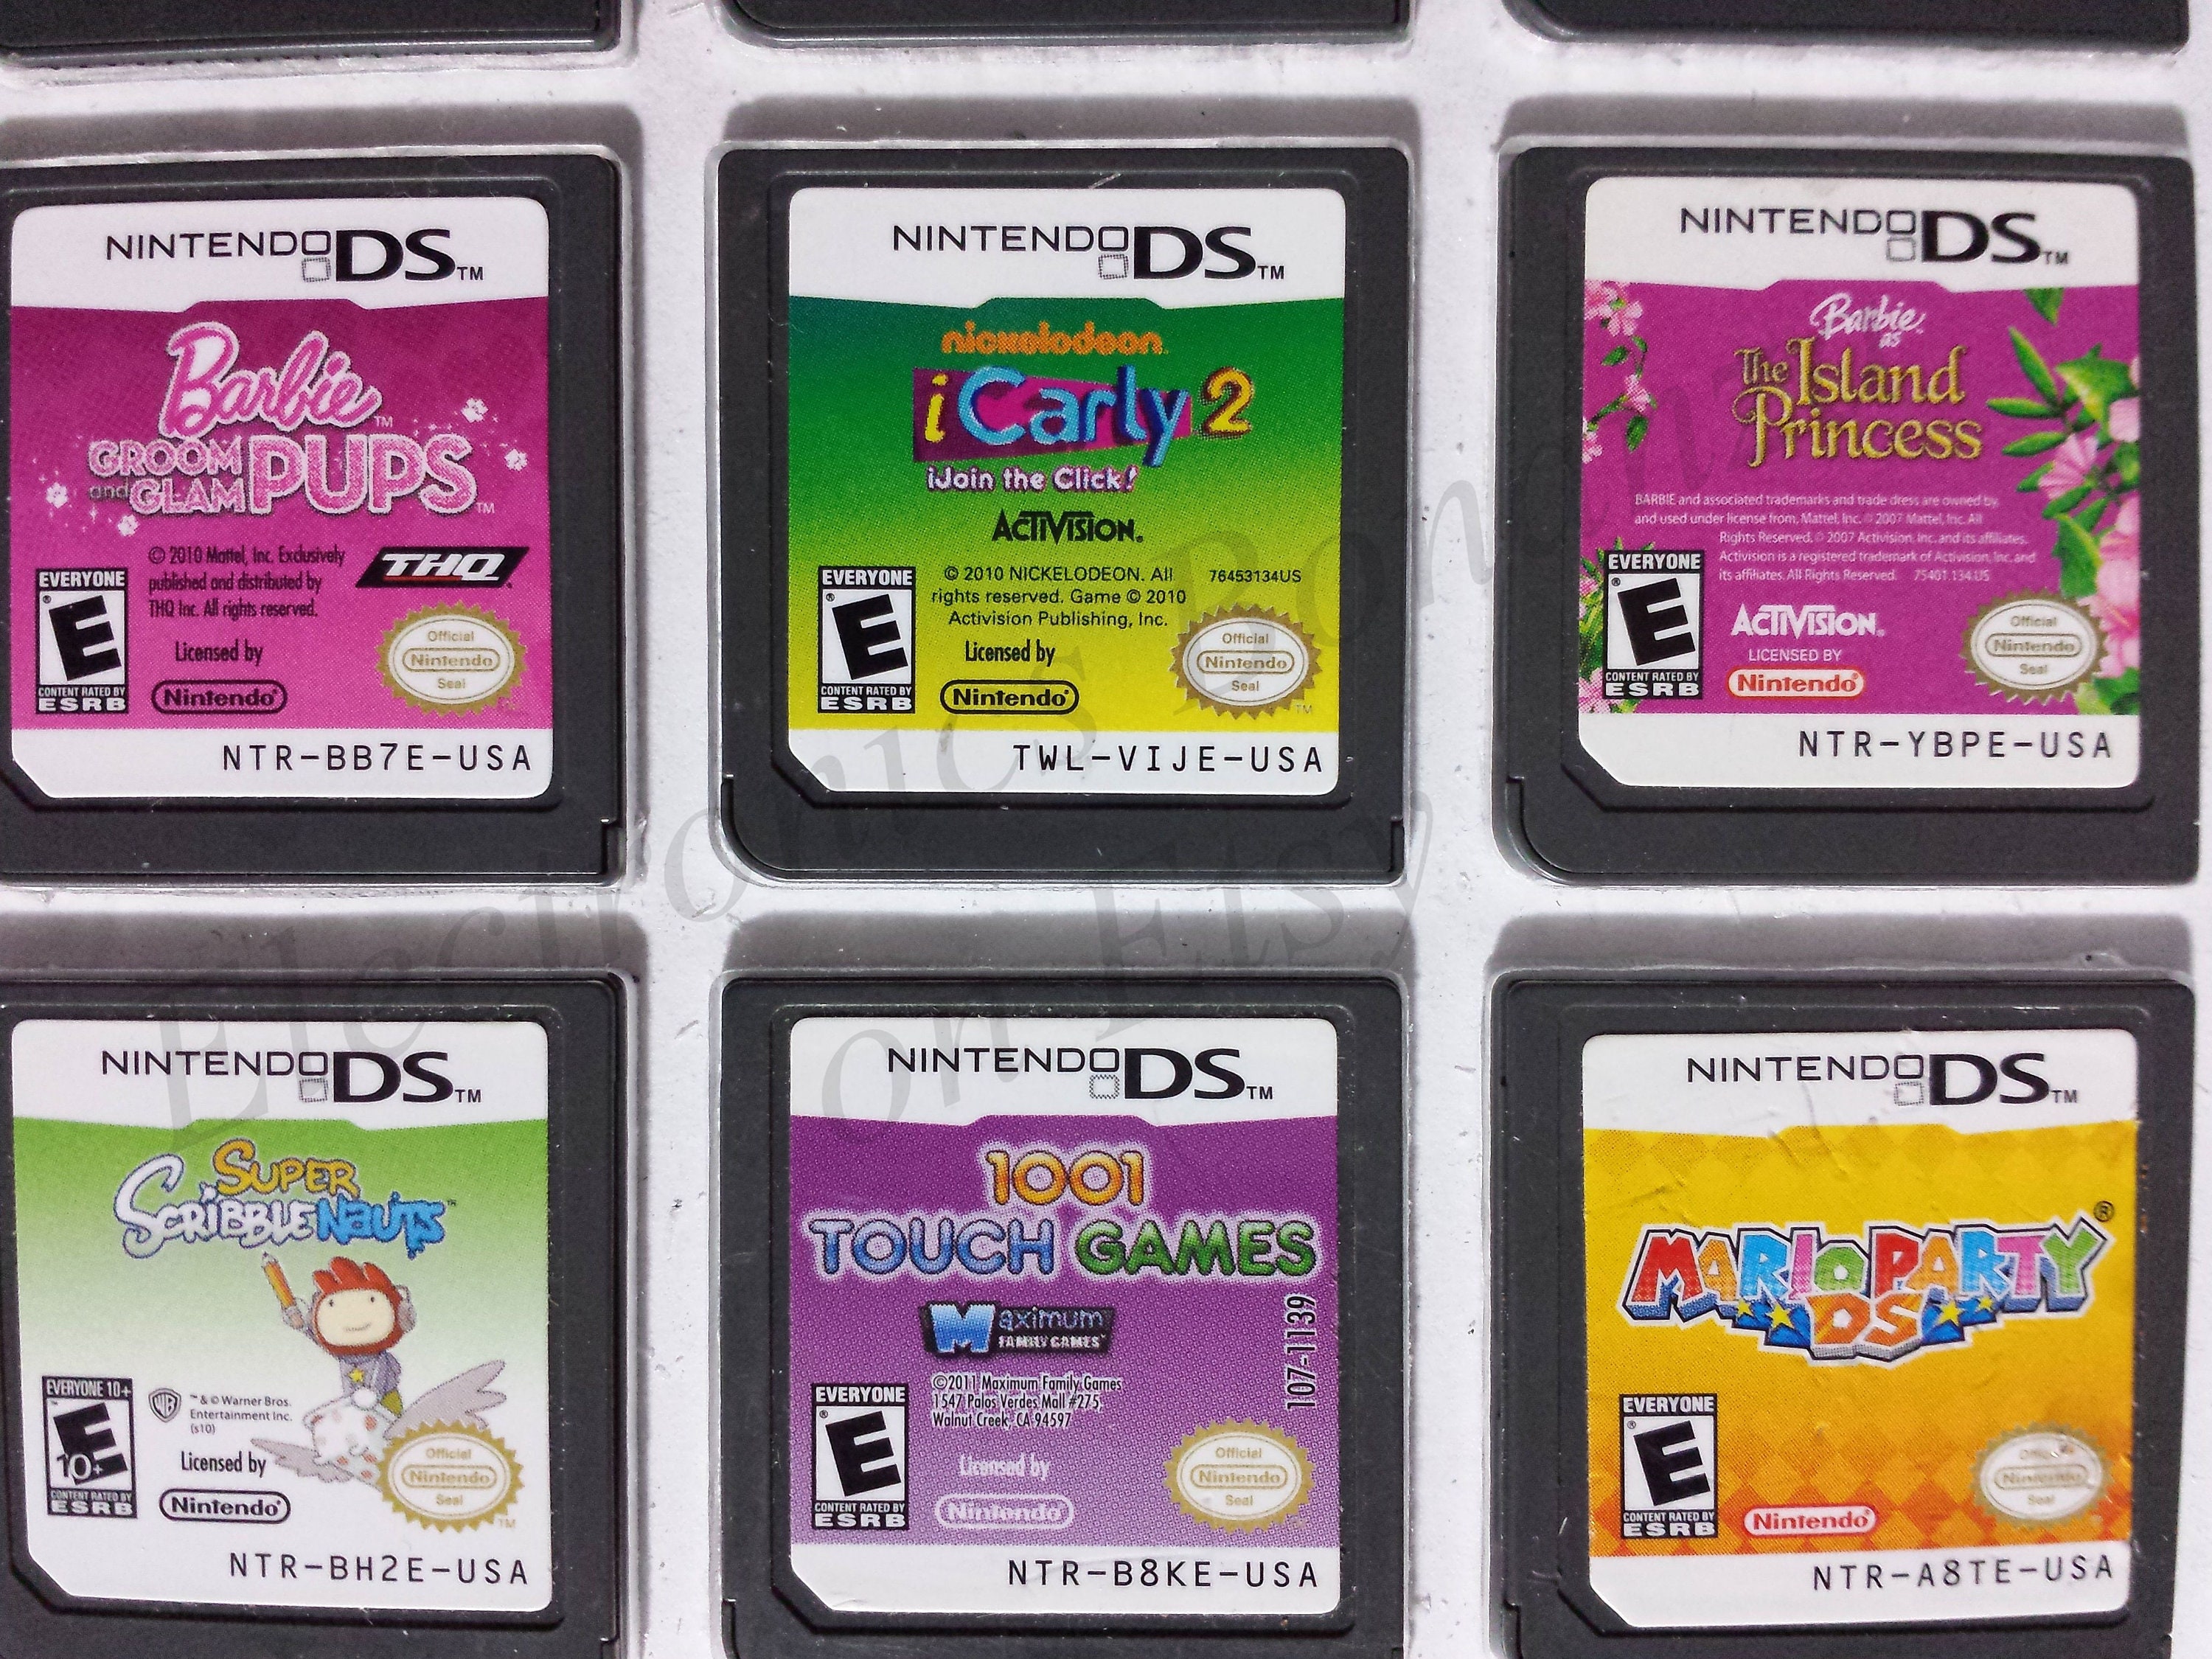 1001 Touch Games For Nintendo DS DSi 3DS Minigames